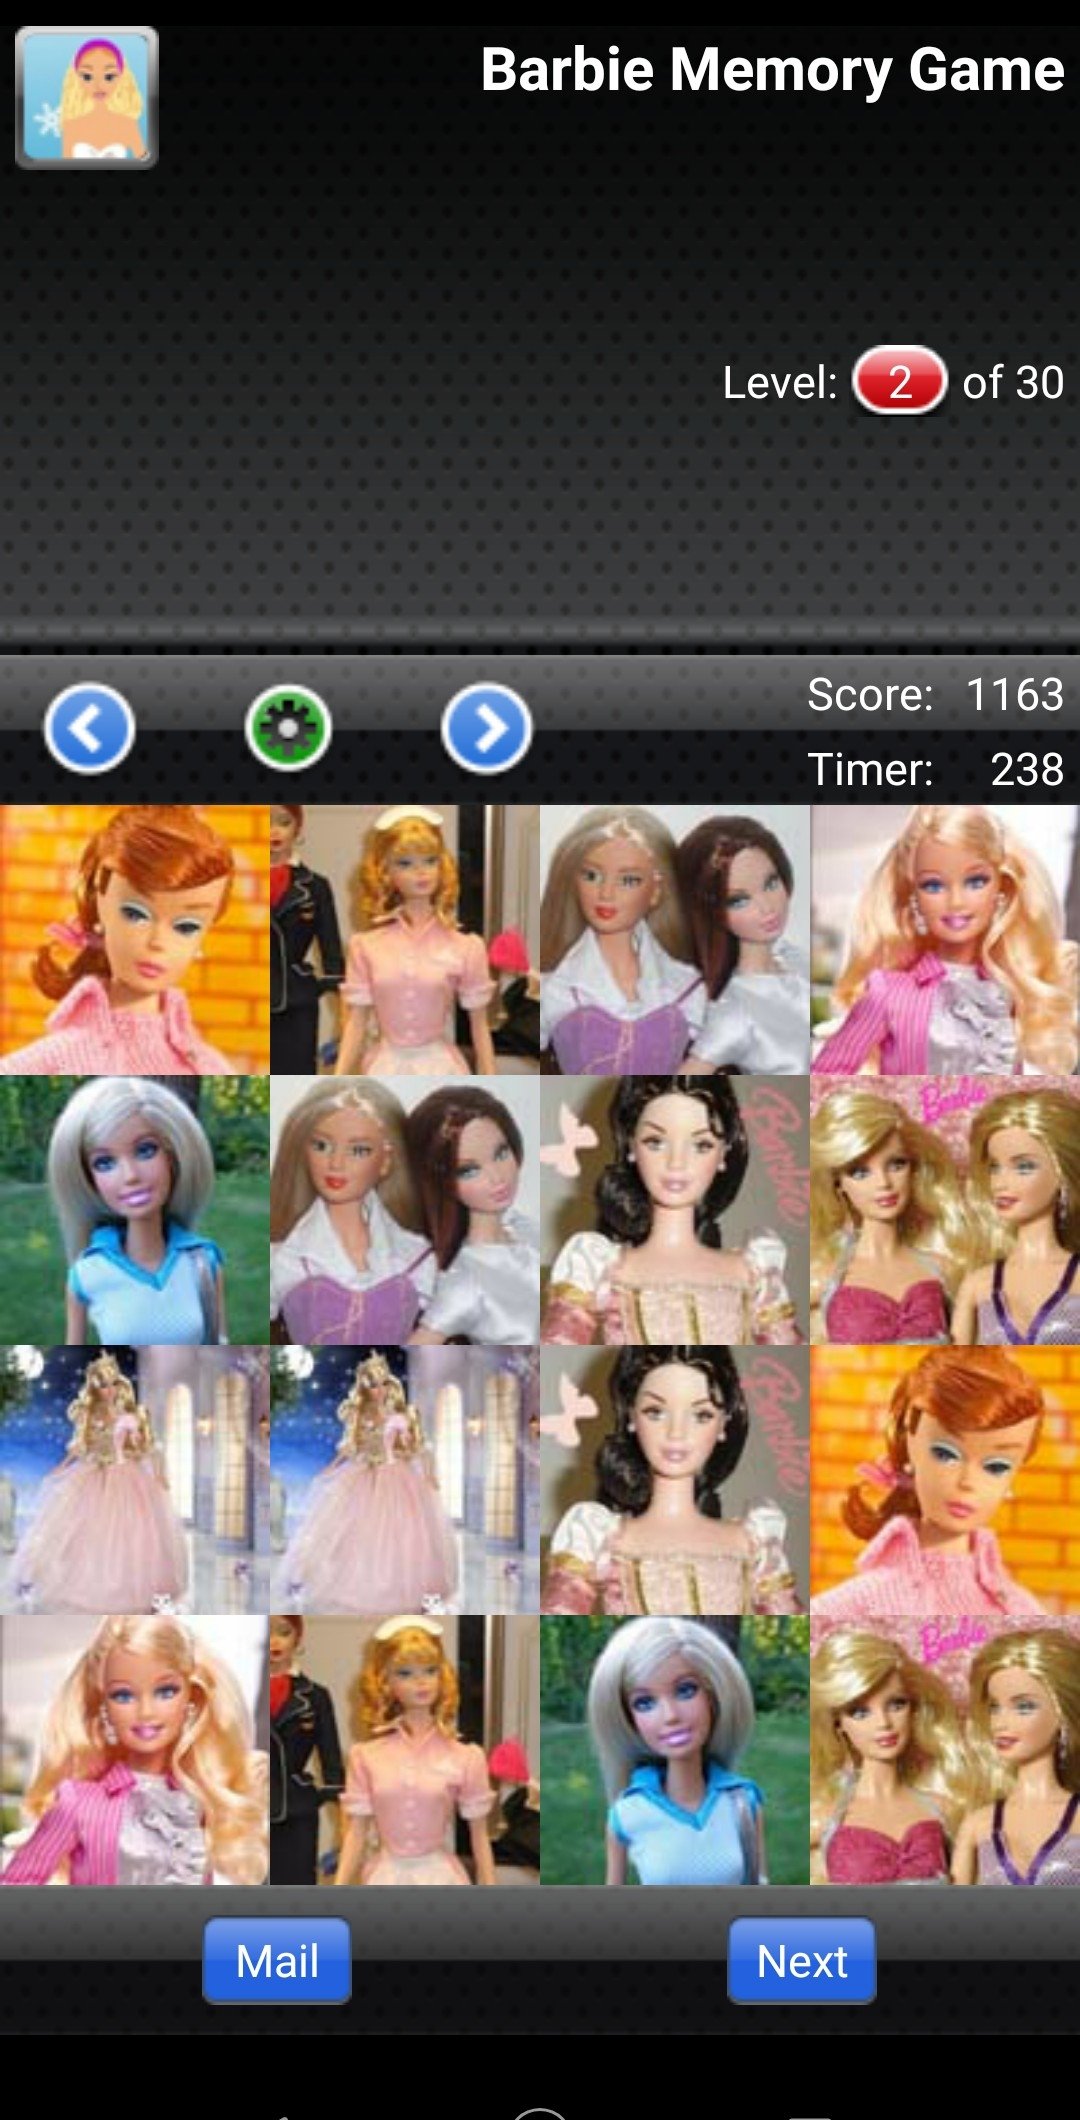 Barbie 2017 Memory download the last version for android